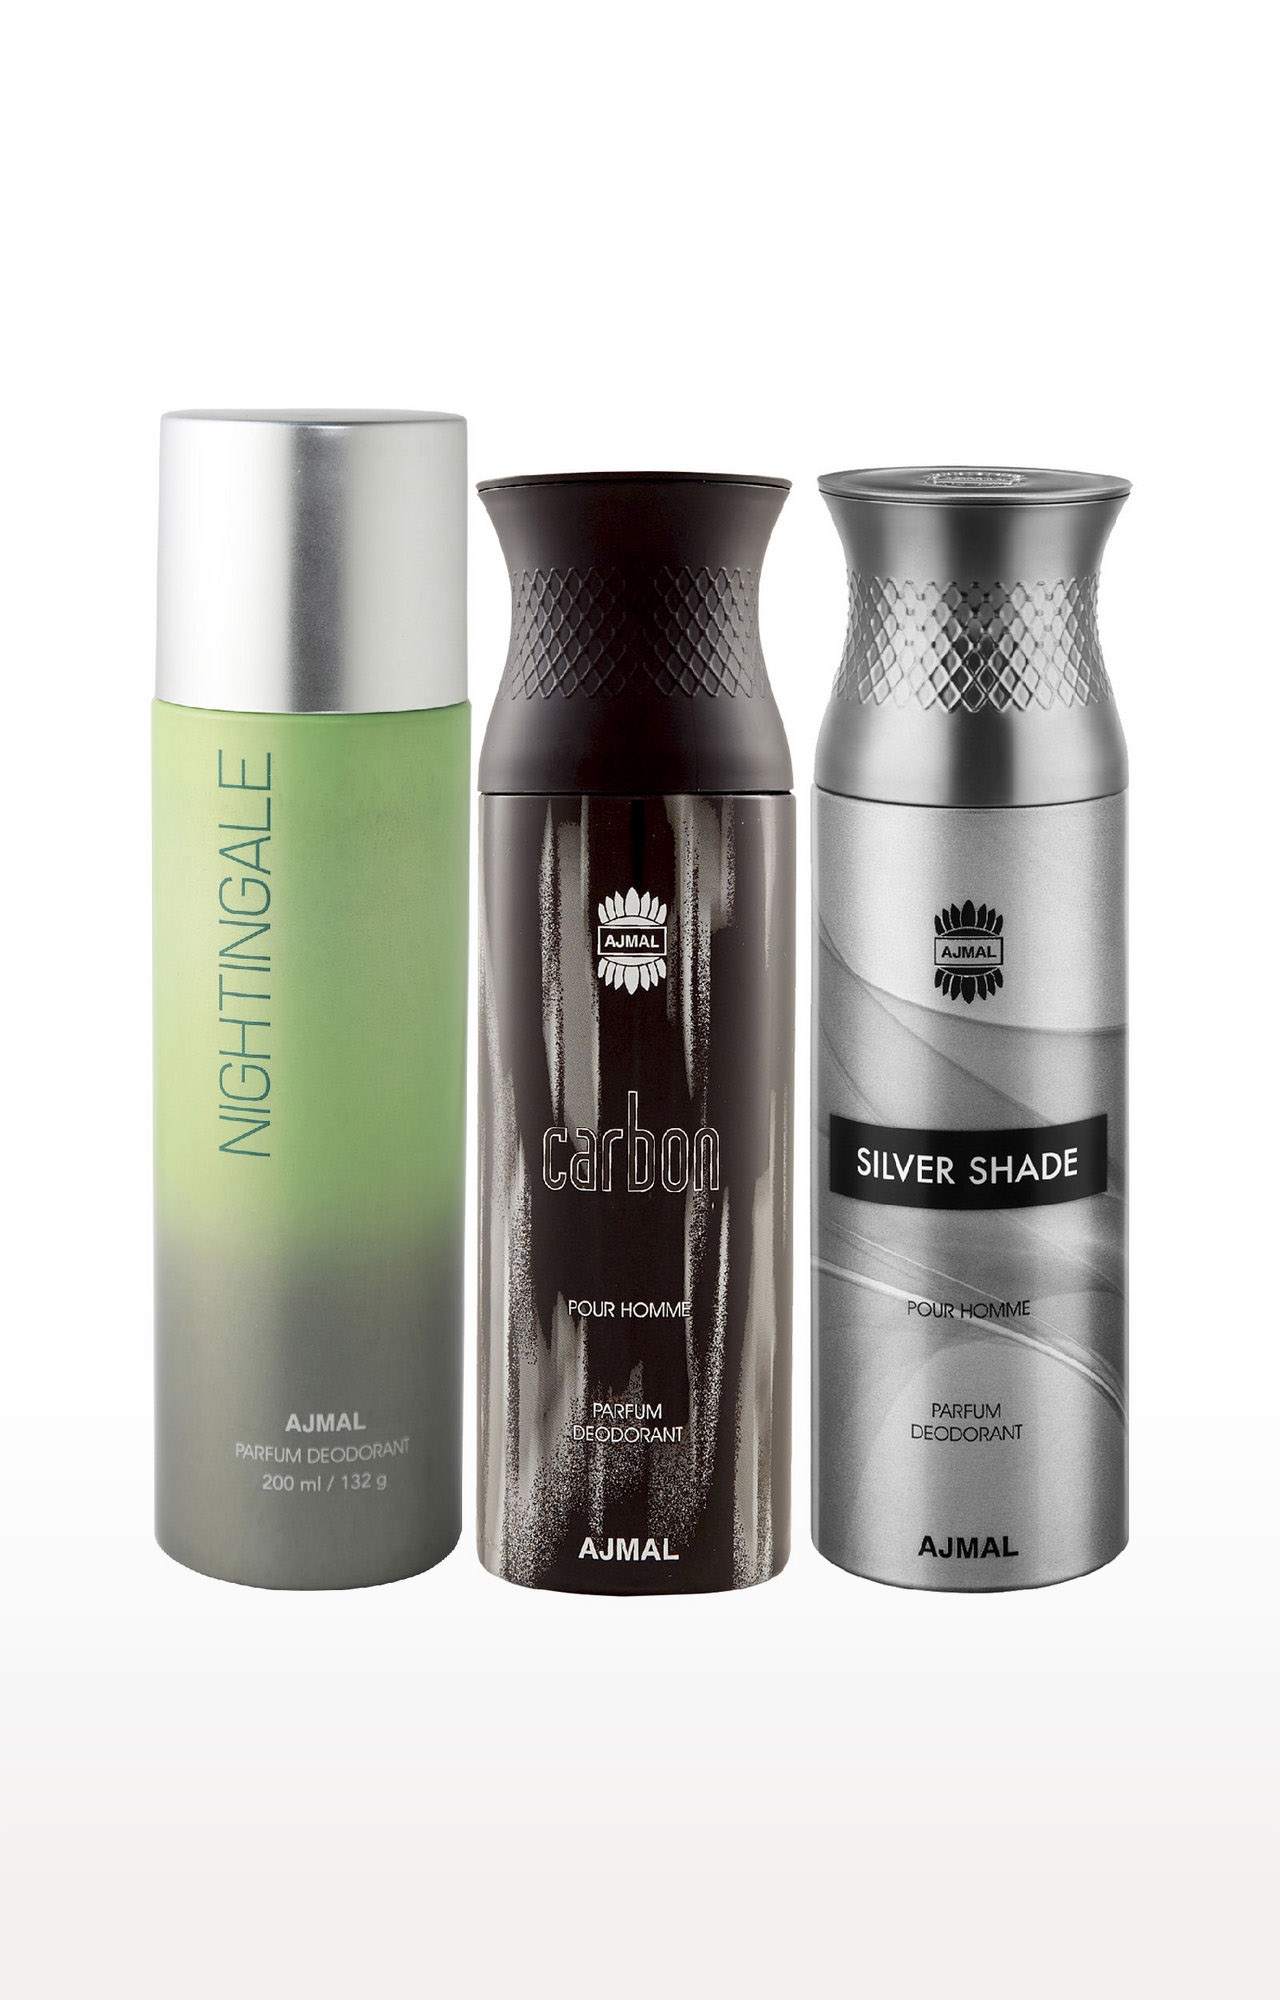 Ajmal | Ajmal 1 Nightingale for Men & Women, 1 Ajmal Carbon for Men and 1 Silver Shade for Men High Quality Deodorants each 200ML Combo pack of 3 (Total 600ML) + 3 Parfum Testers